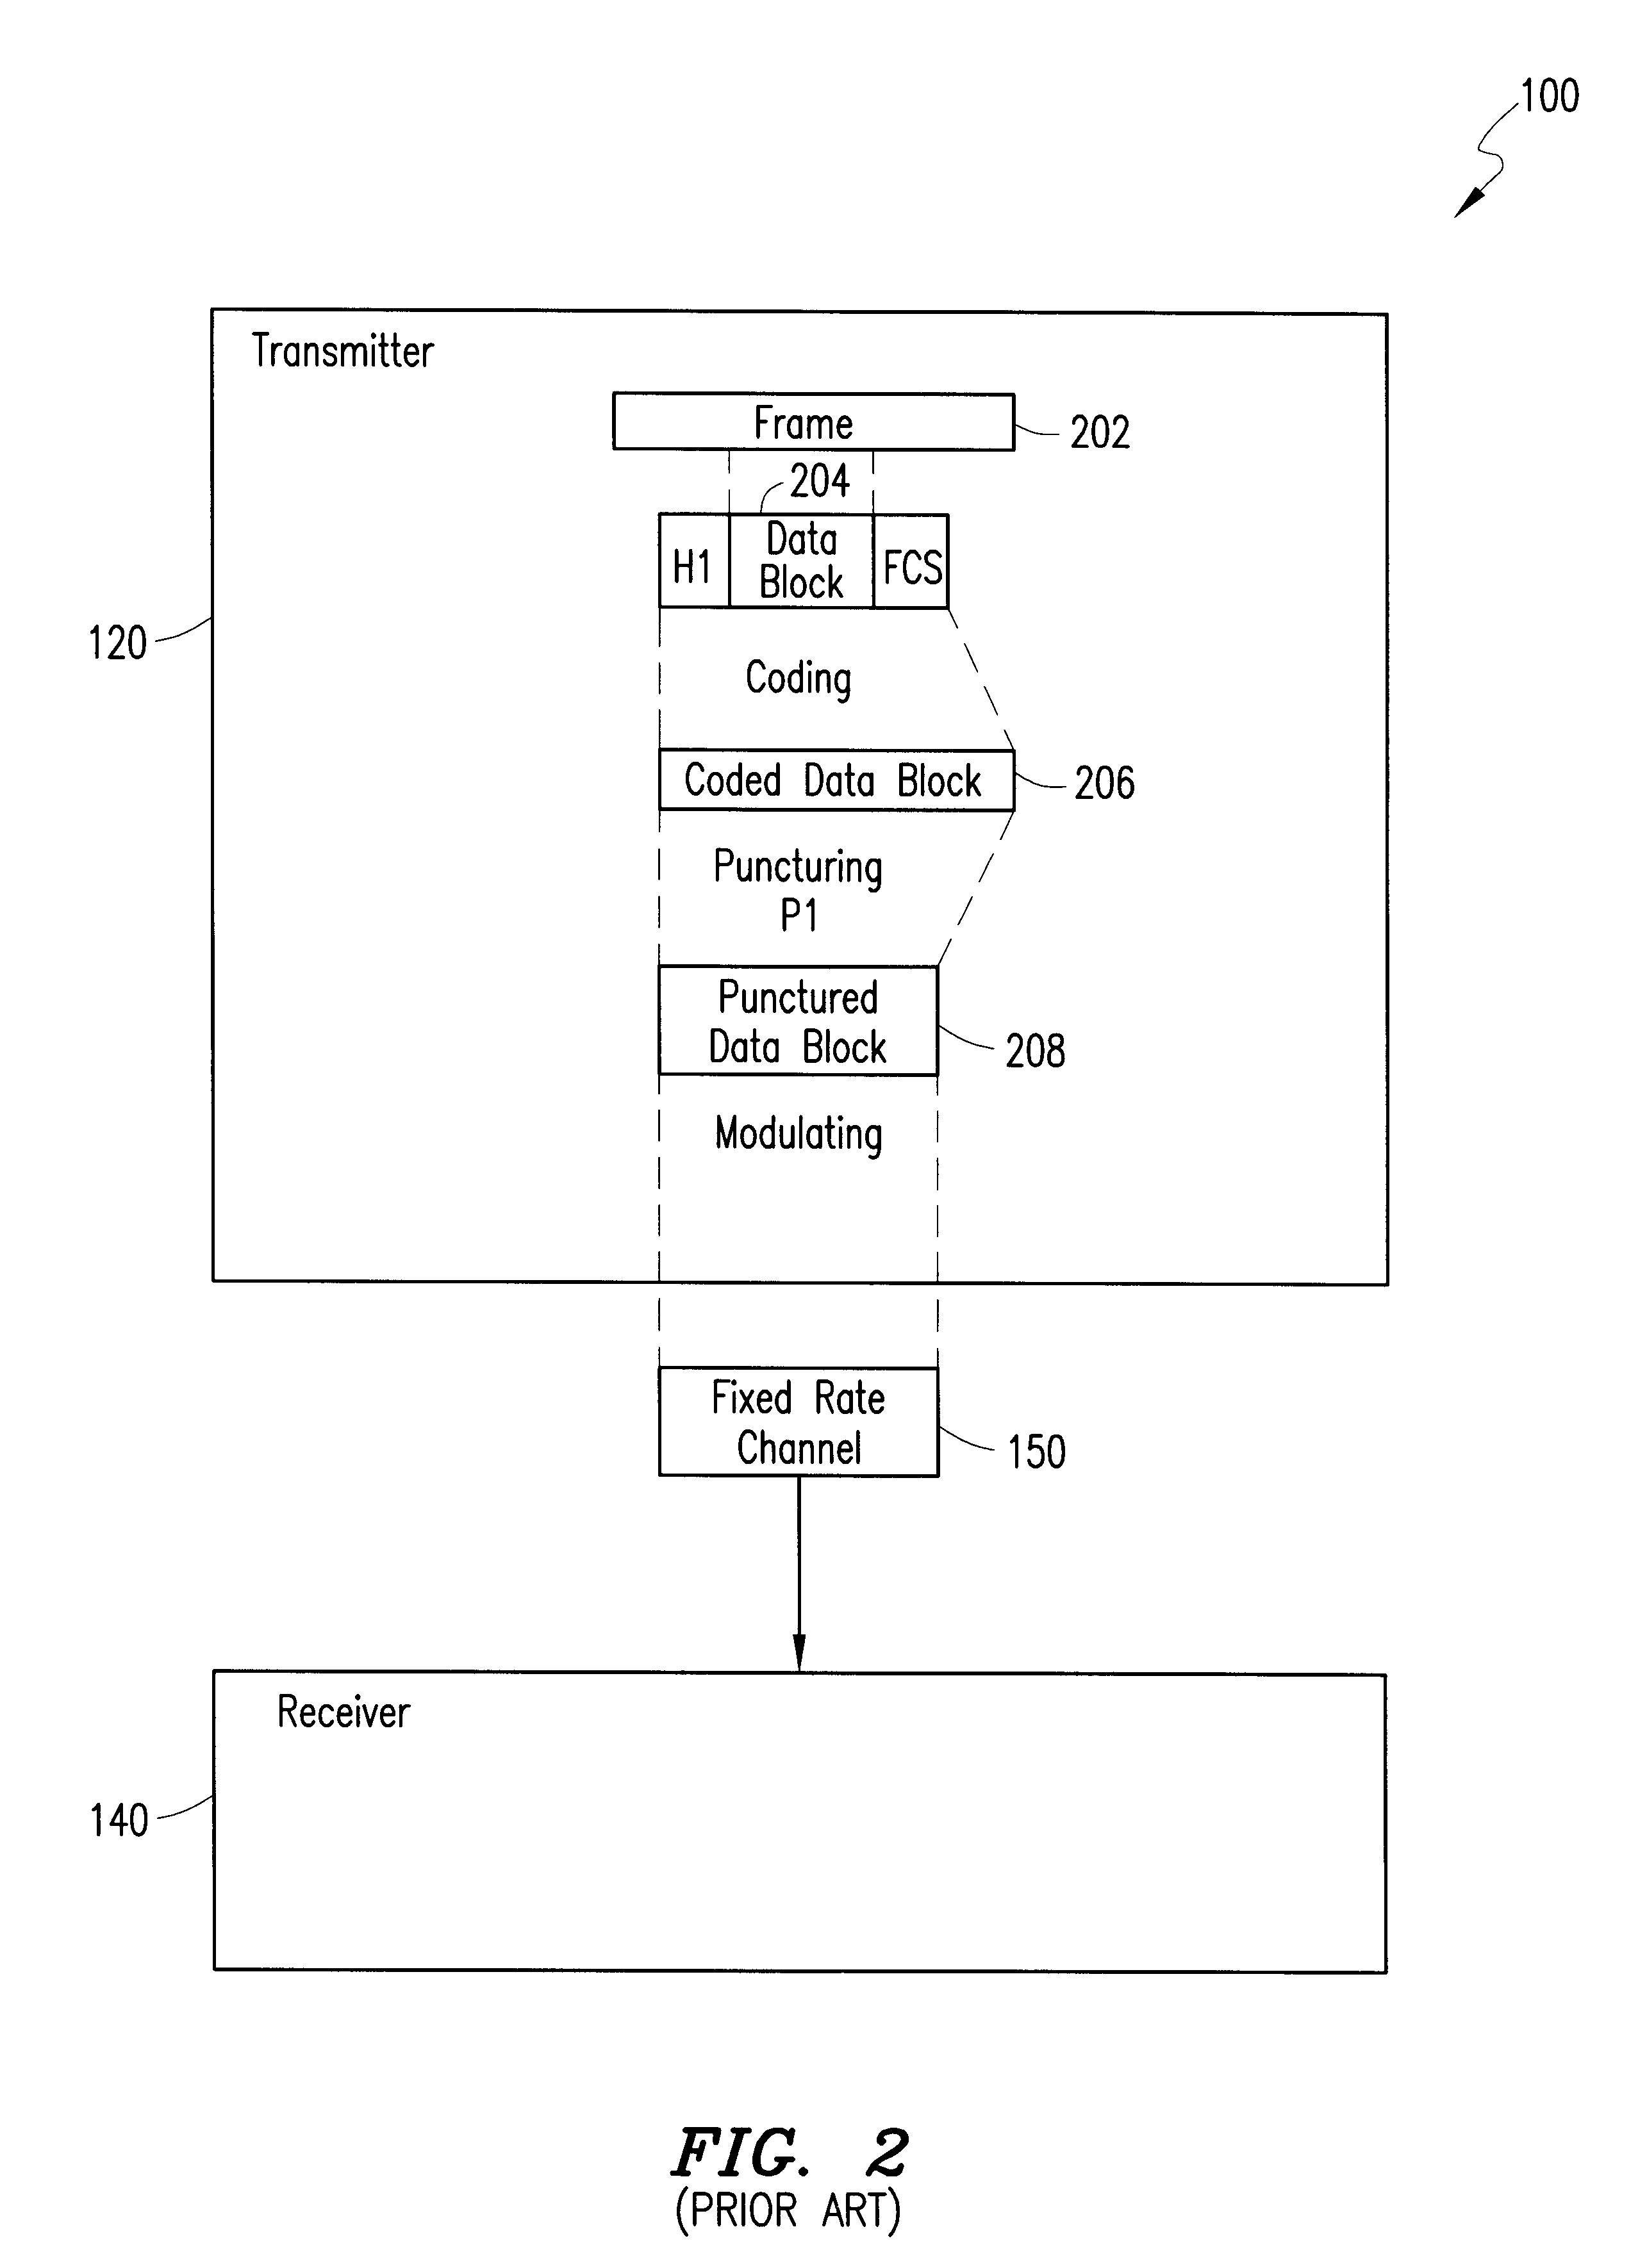 Telecommunications system and method for supporting an incremental redundancy error handling scheme using available gross rate channels